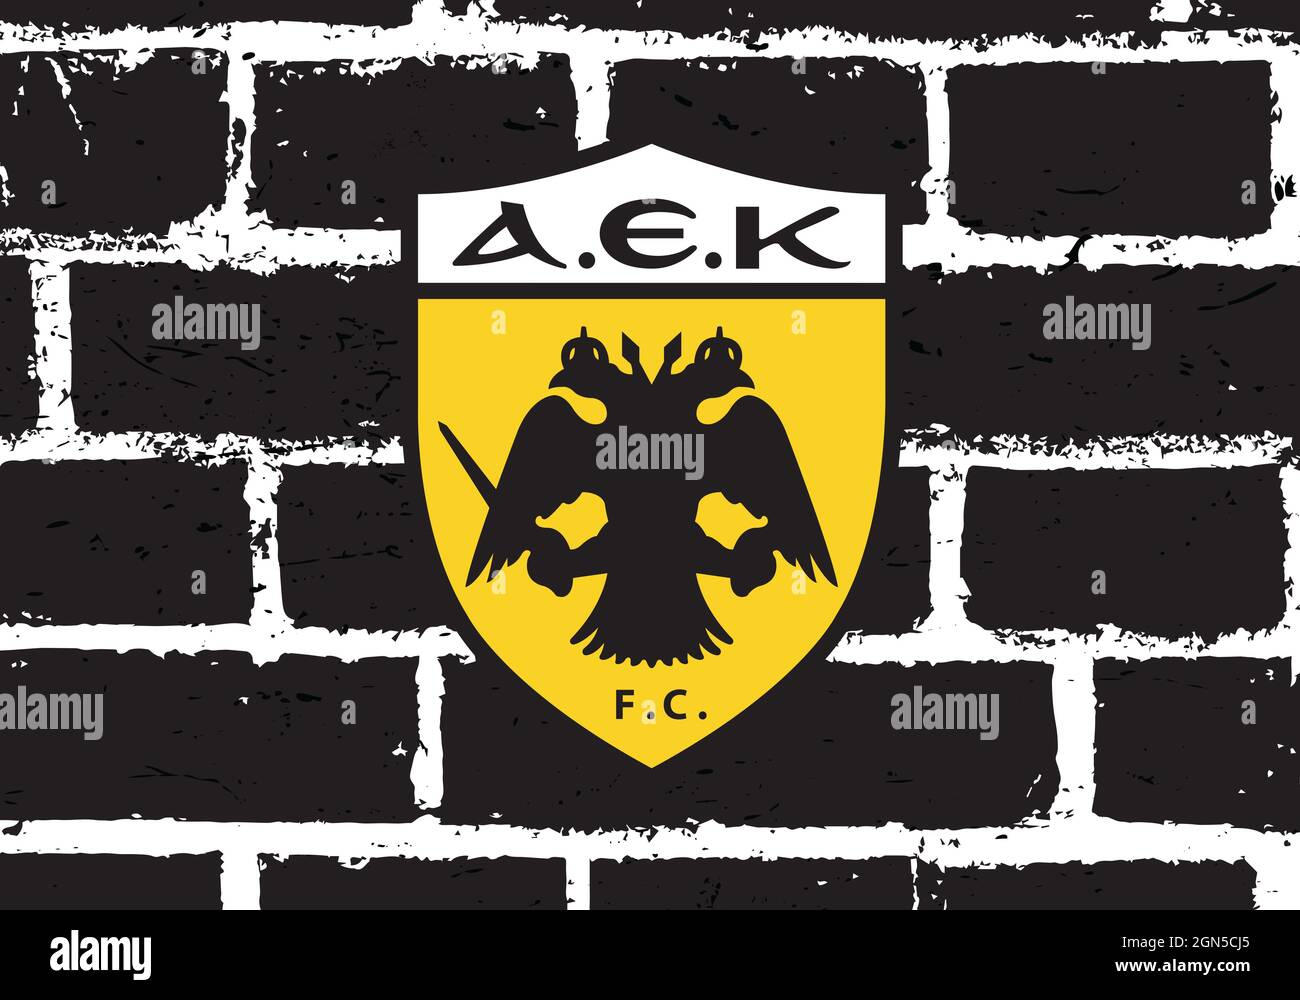 Coat of arms AEK Athens F.C., football club from Greece Stock Photo - Alamy